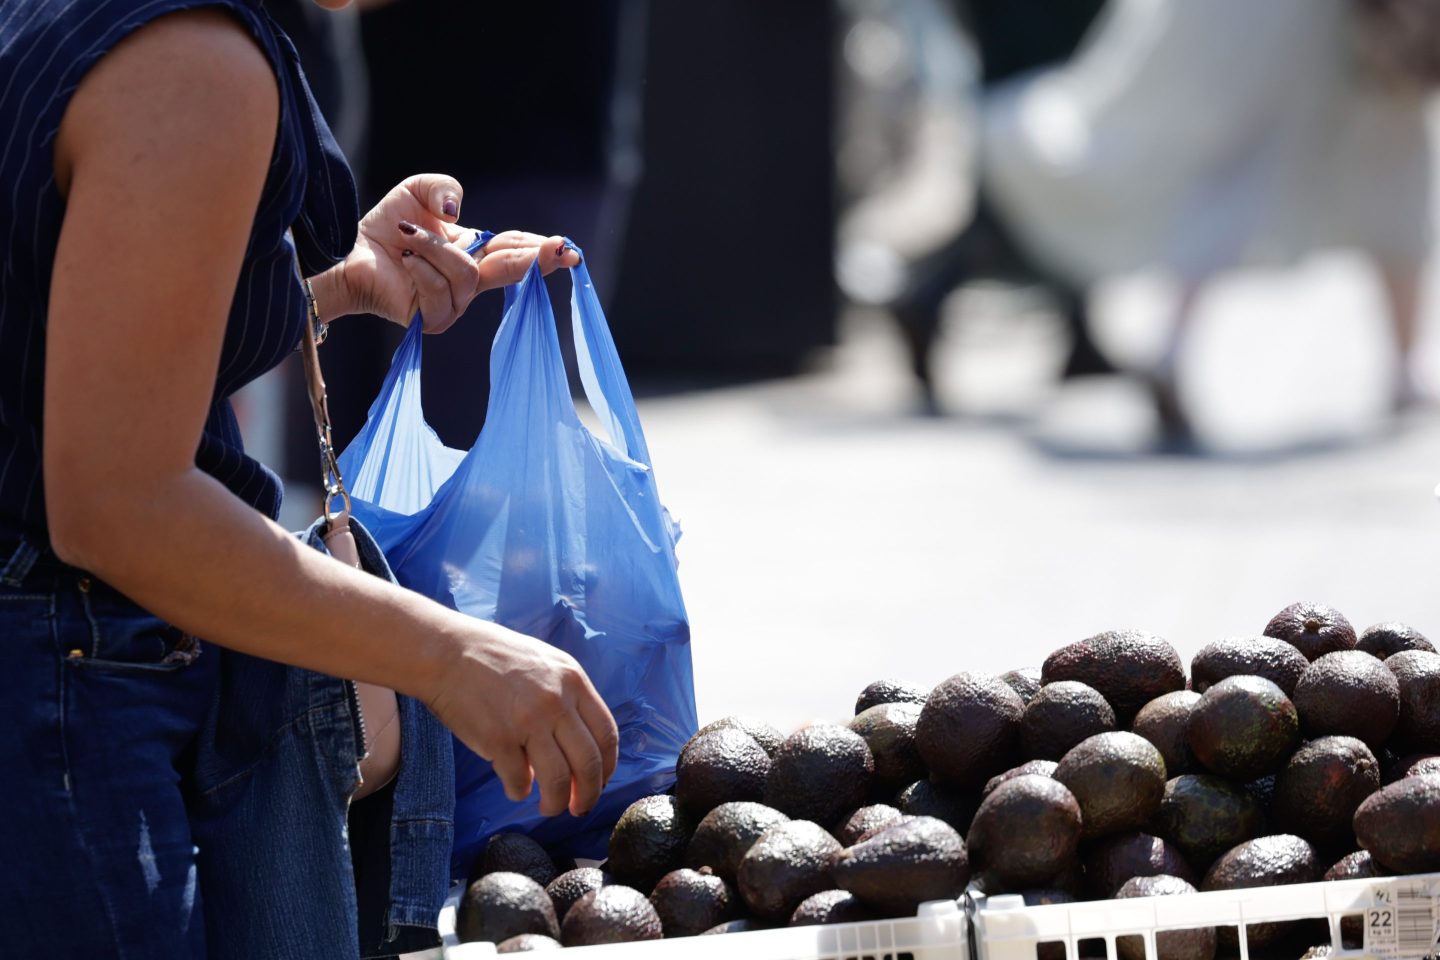 Woman shops for avocados